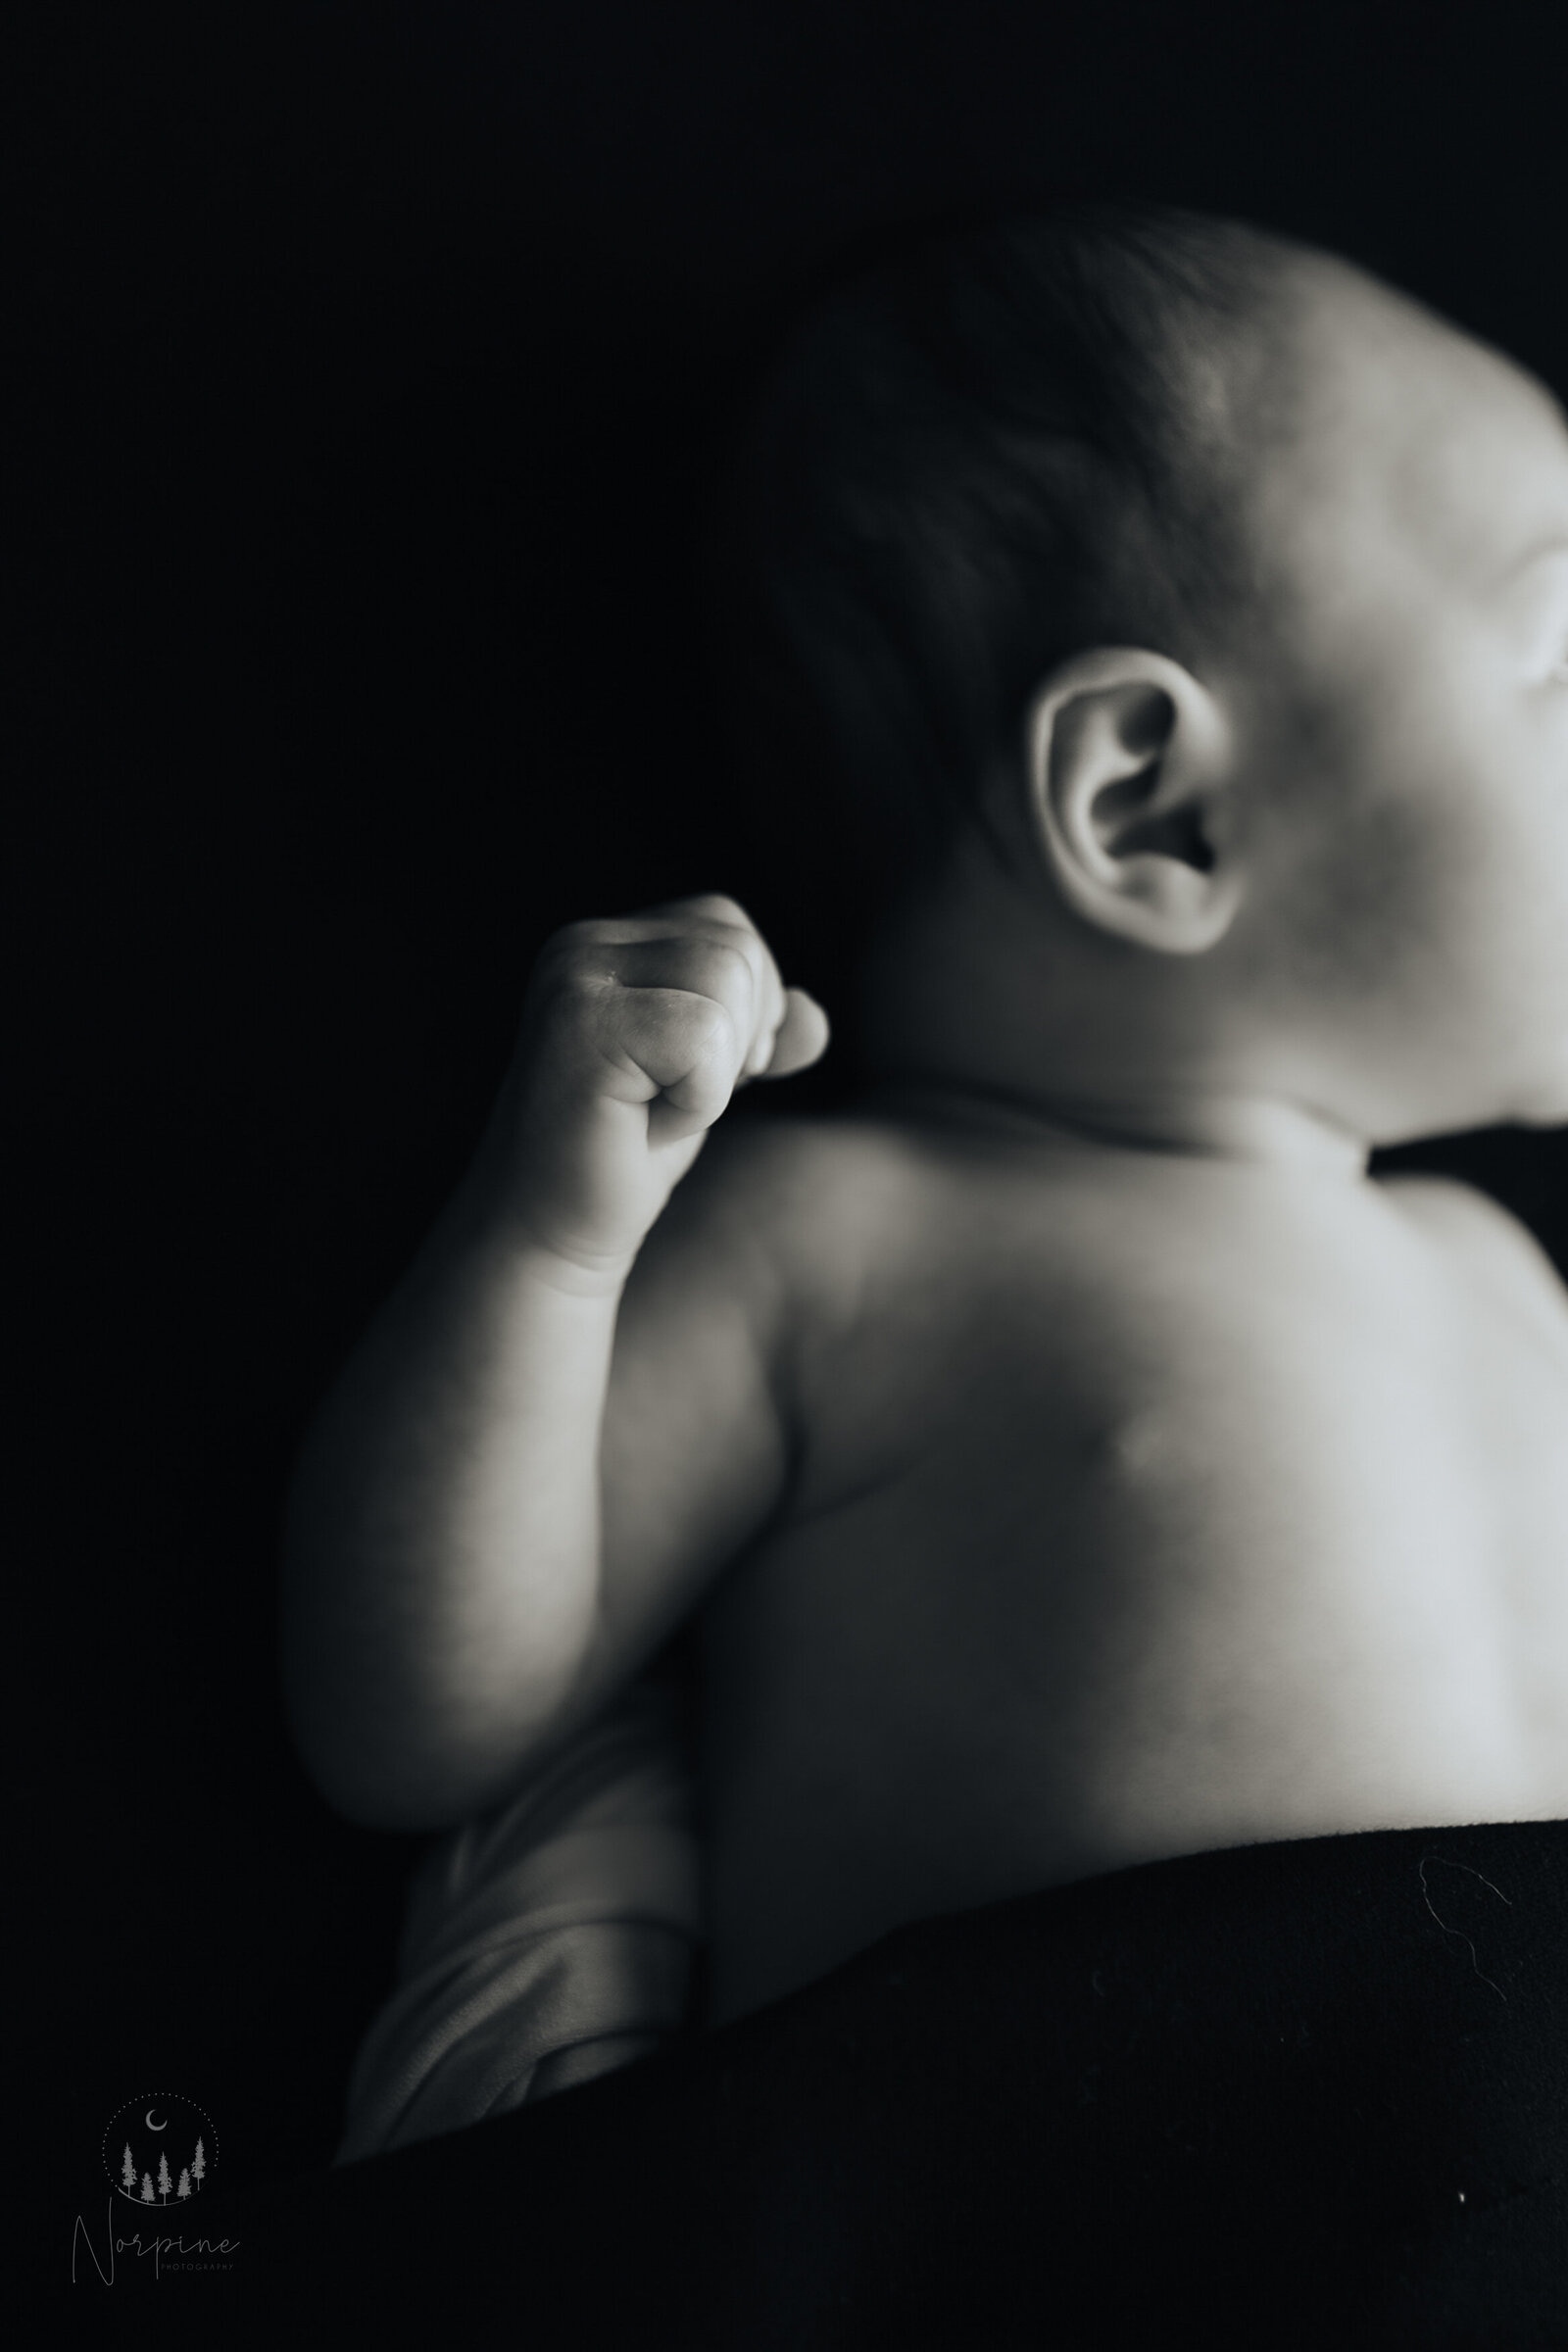 Black and white image of a newborn boy focused on his fist raised, lit from the right side